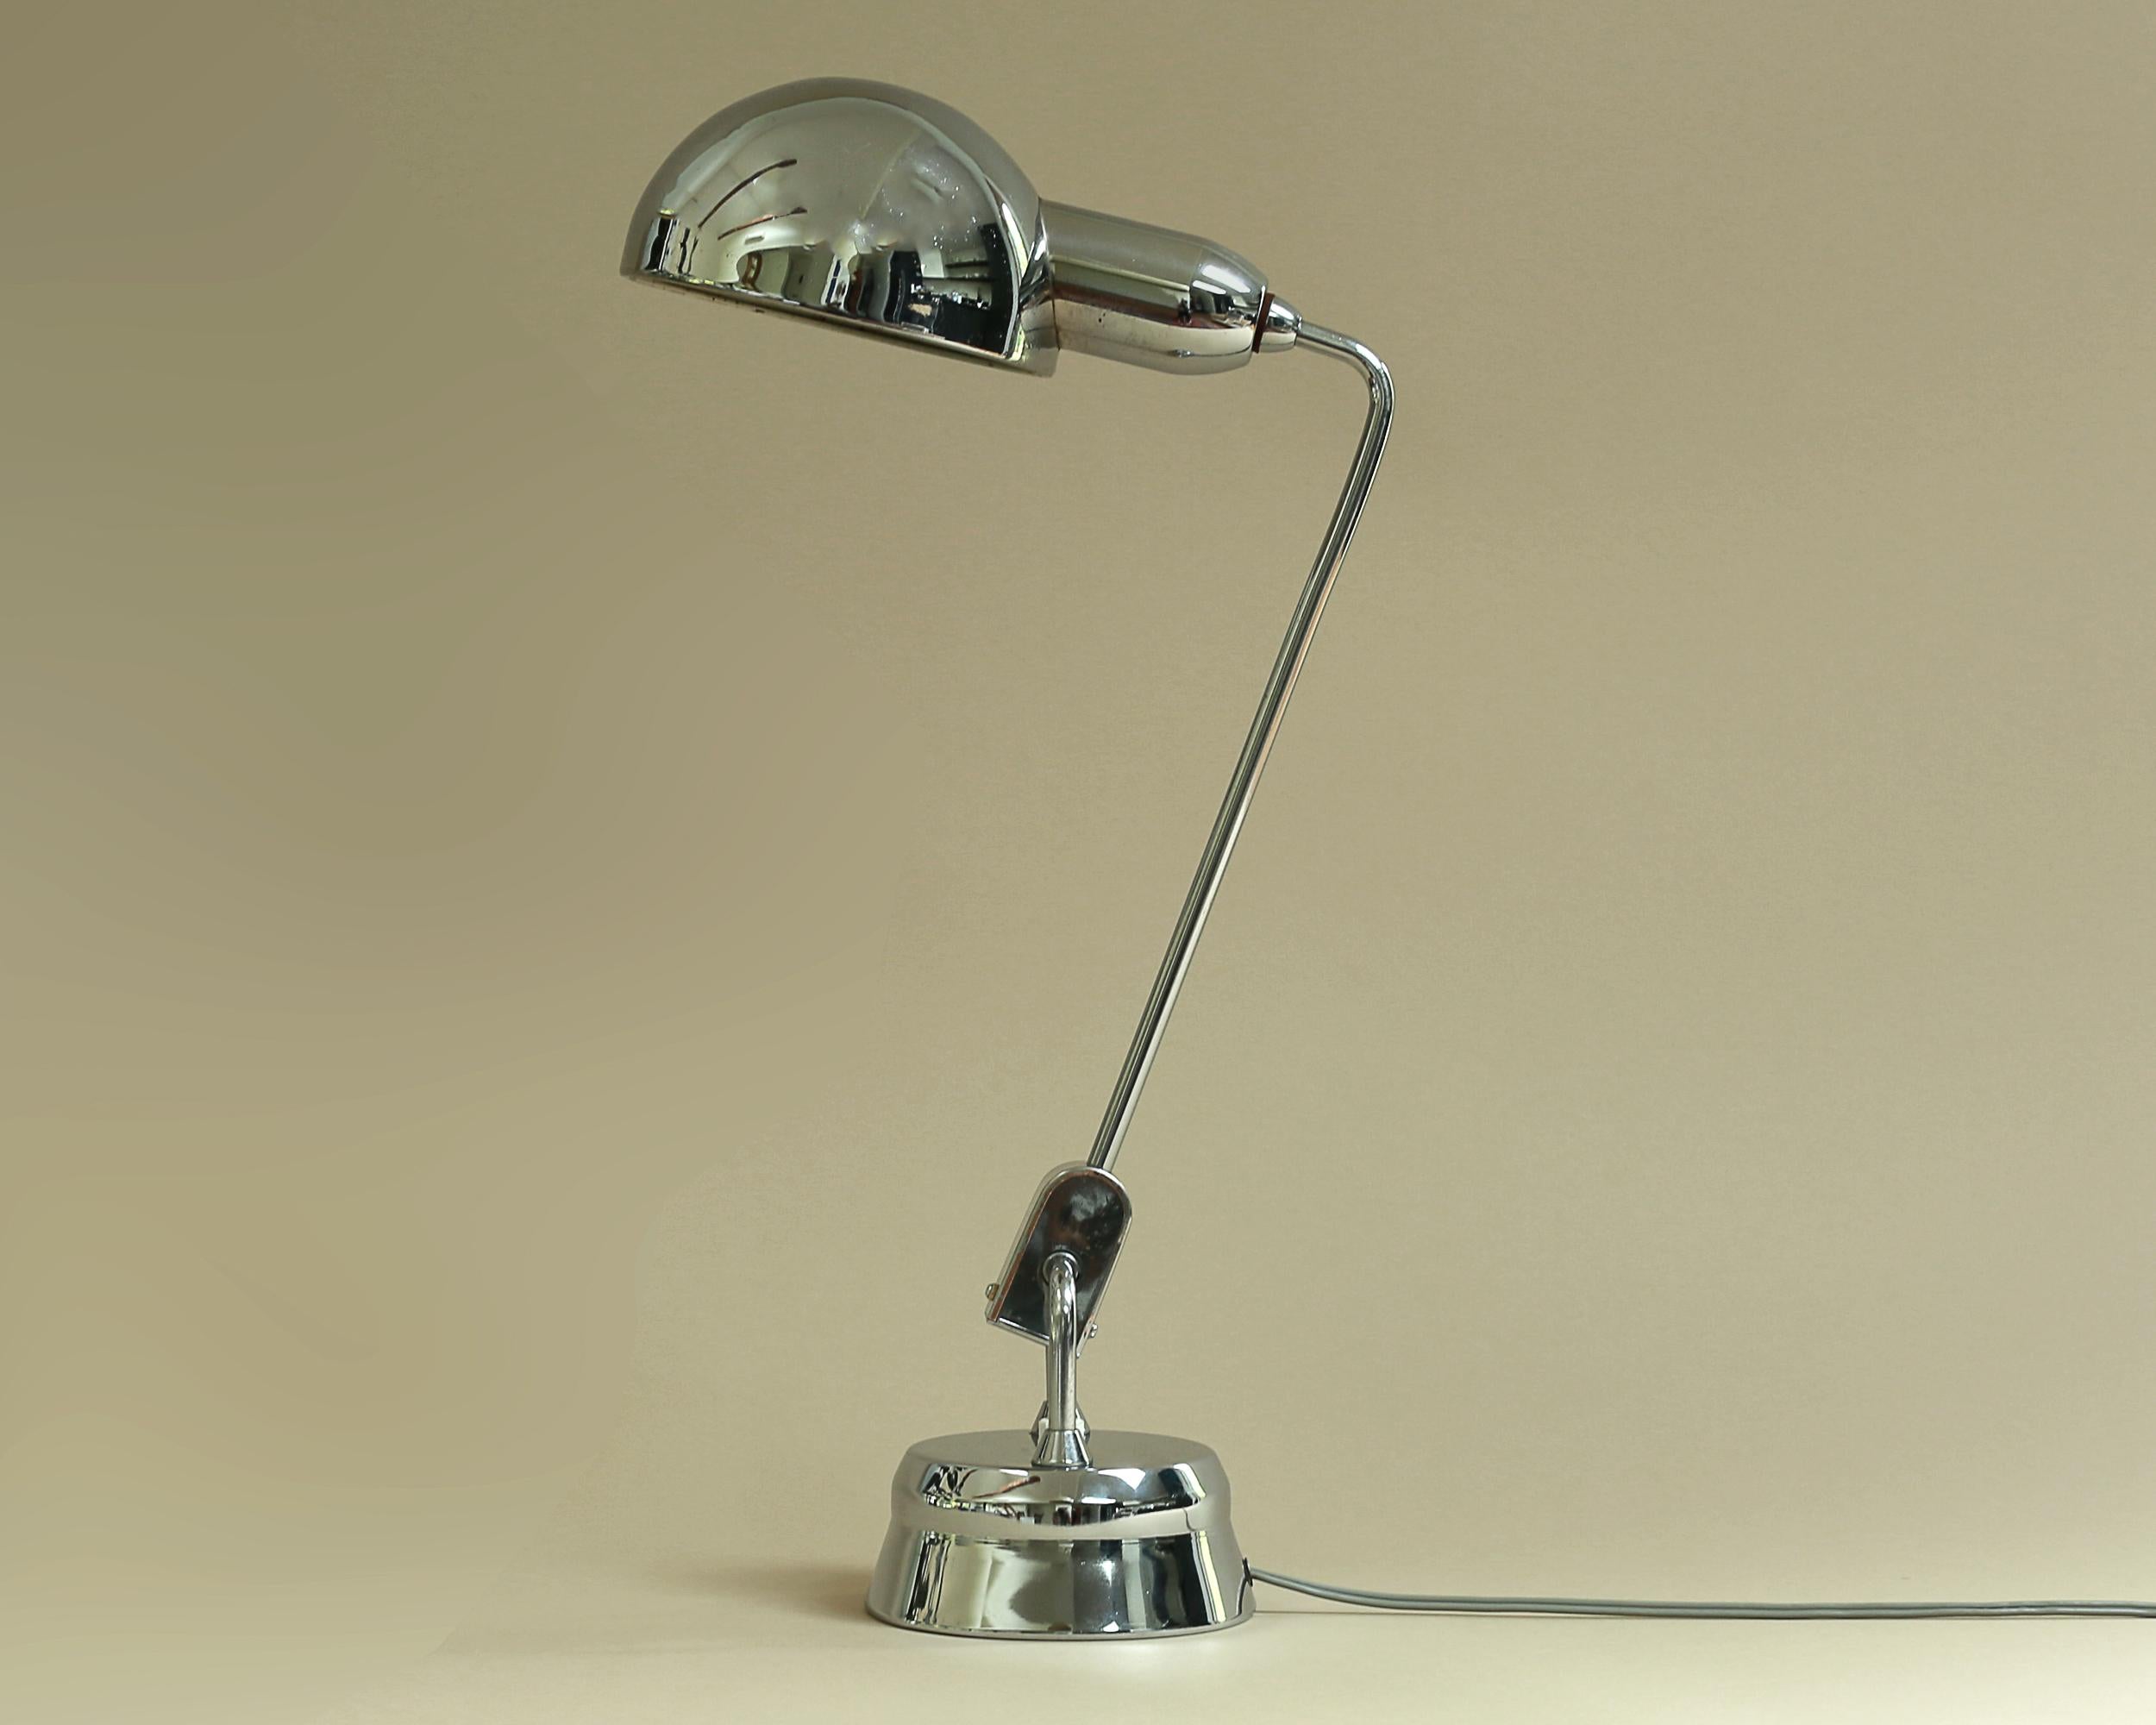 The JUMO model 600 desk lamp was designed in 1940 by André Mounique and Yves Jujeau for their lighting company, JUMO, which was located outside of Paris.  The light won world notoriety when renowned architect/designer, Charlotte Perriand, chose this